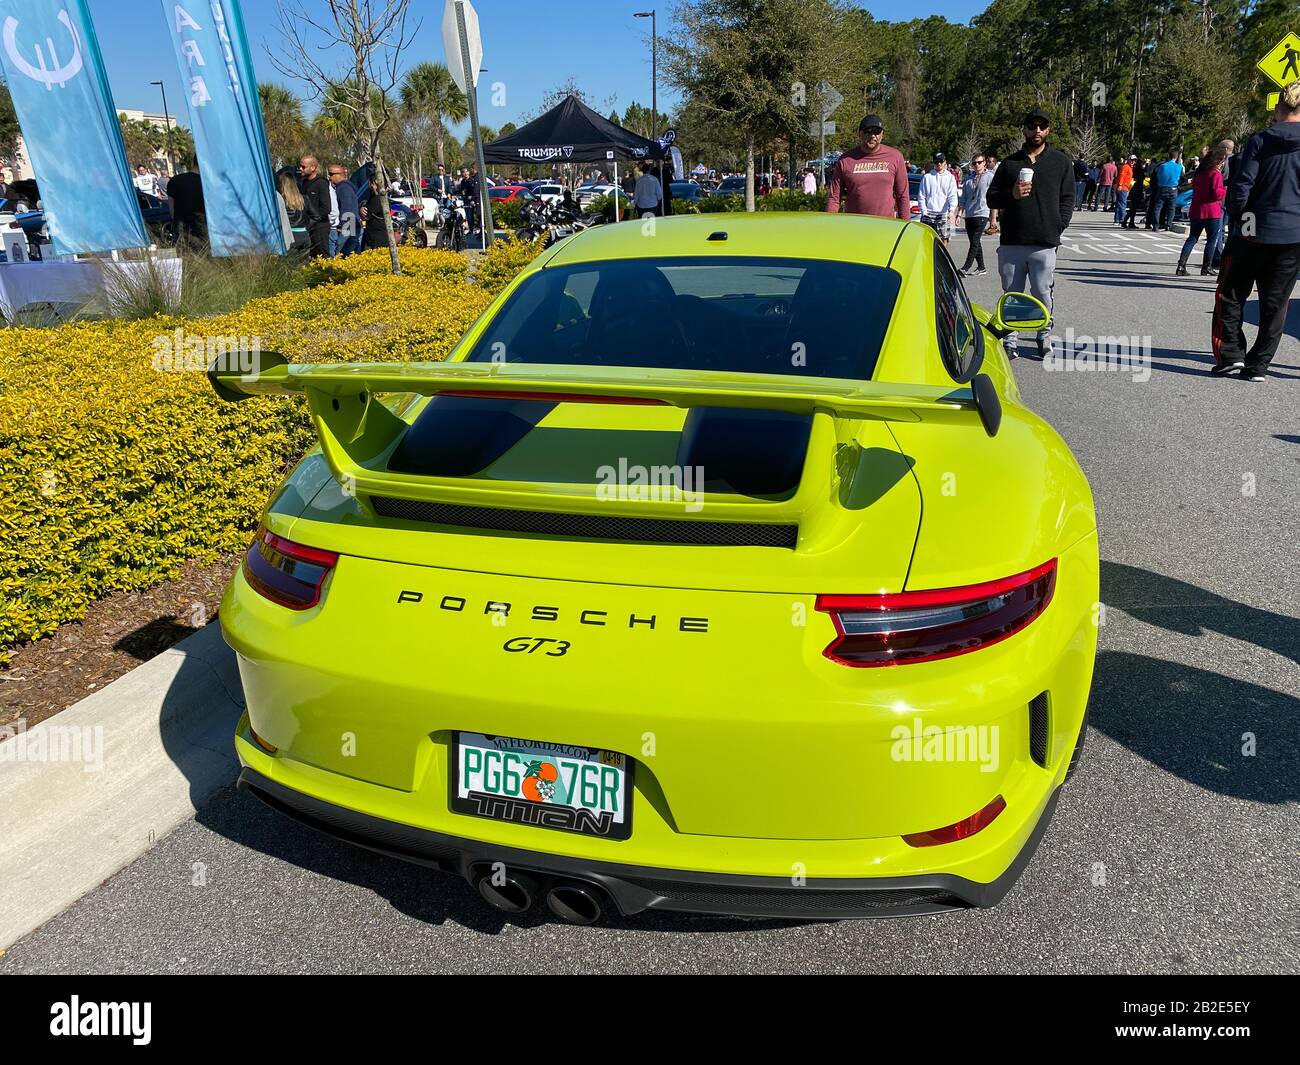 Orlando, FL/USA-3/1/20: The rearend of a bright green Porsche GT3 at a free car show in a retail store parking lot. Stock Photo